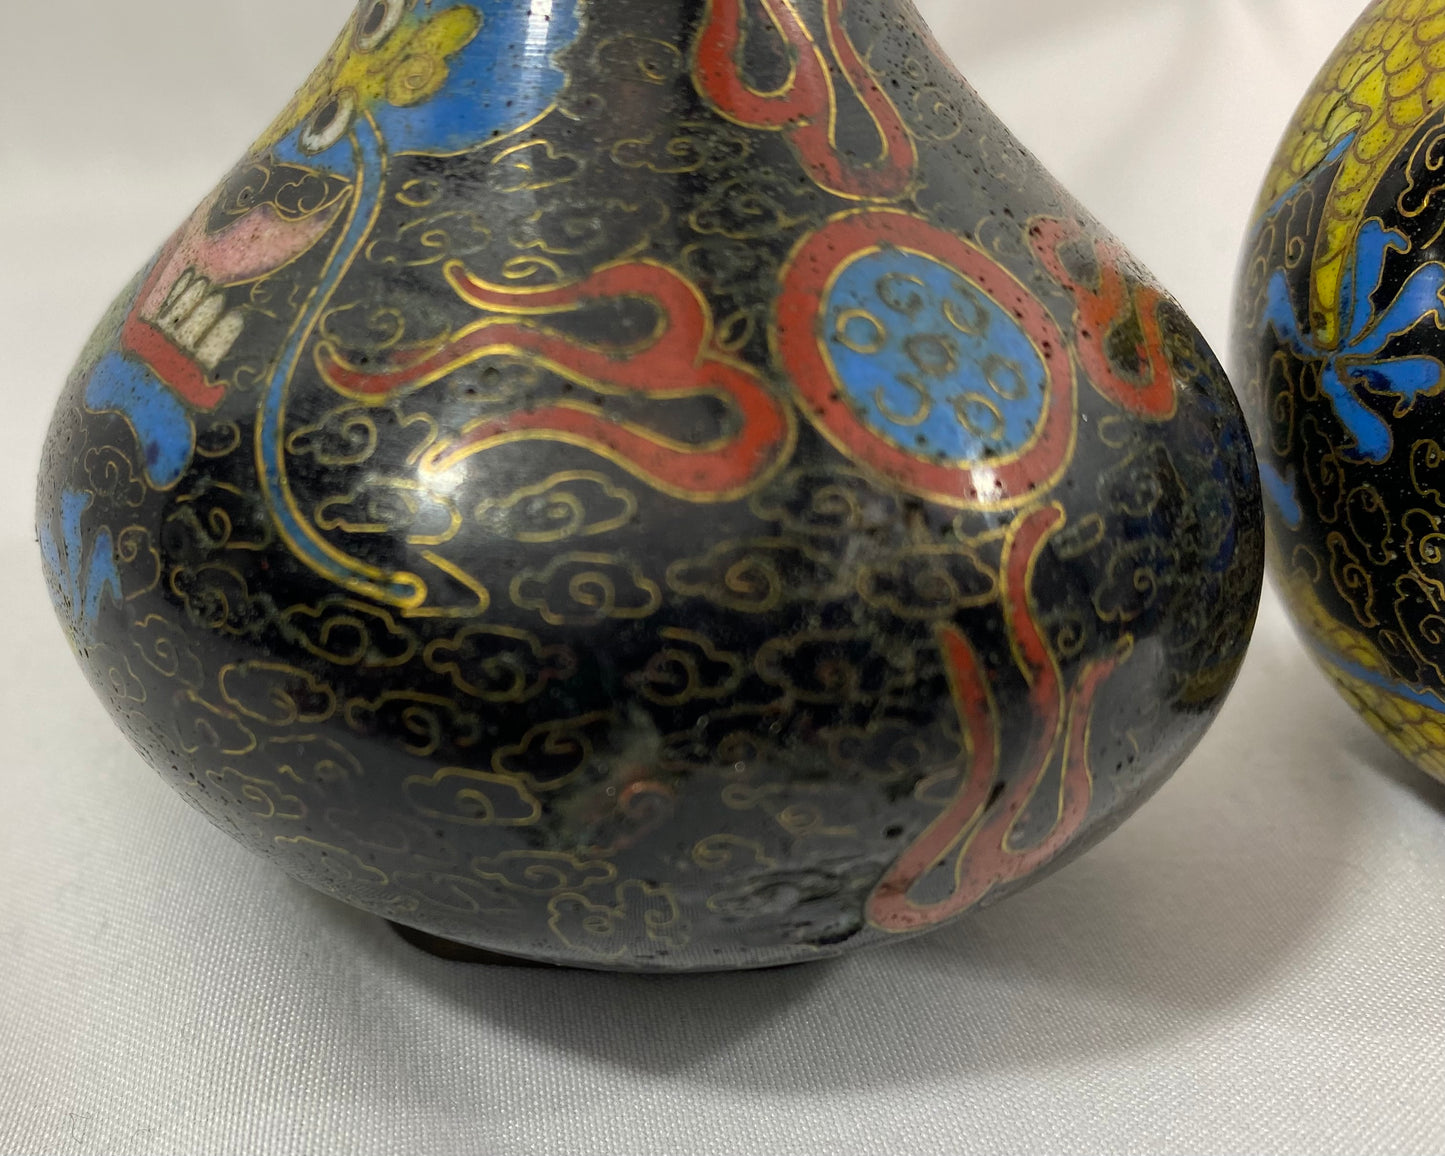 19th C Chinese Cloisonne Dragon Vases